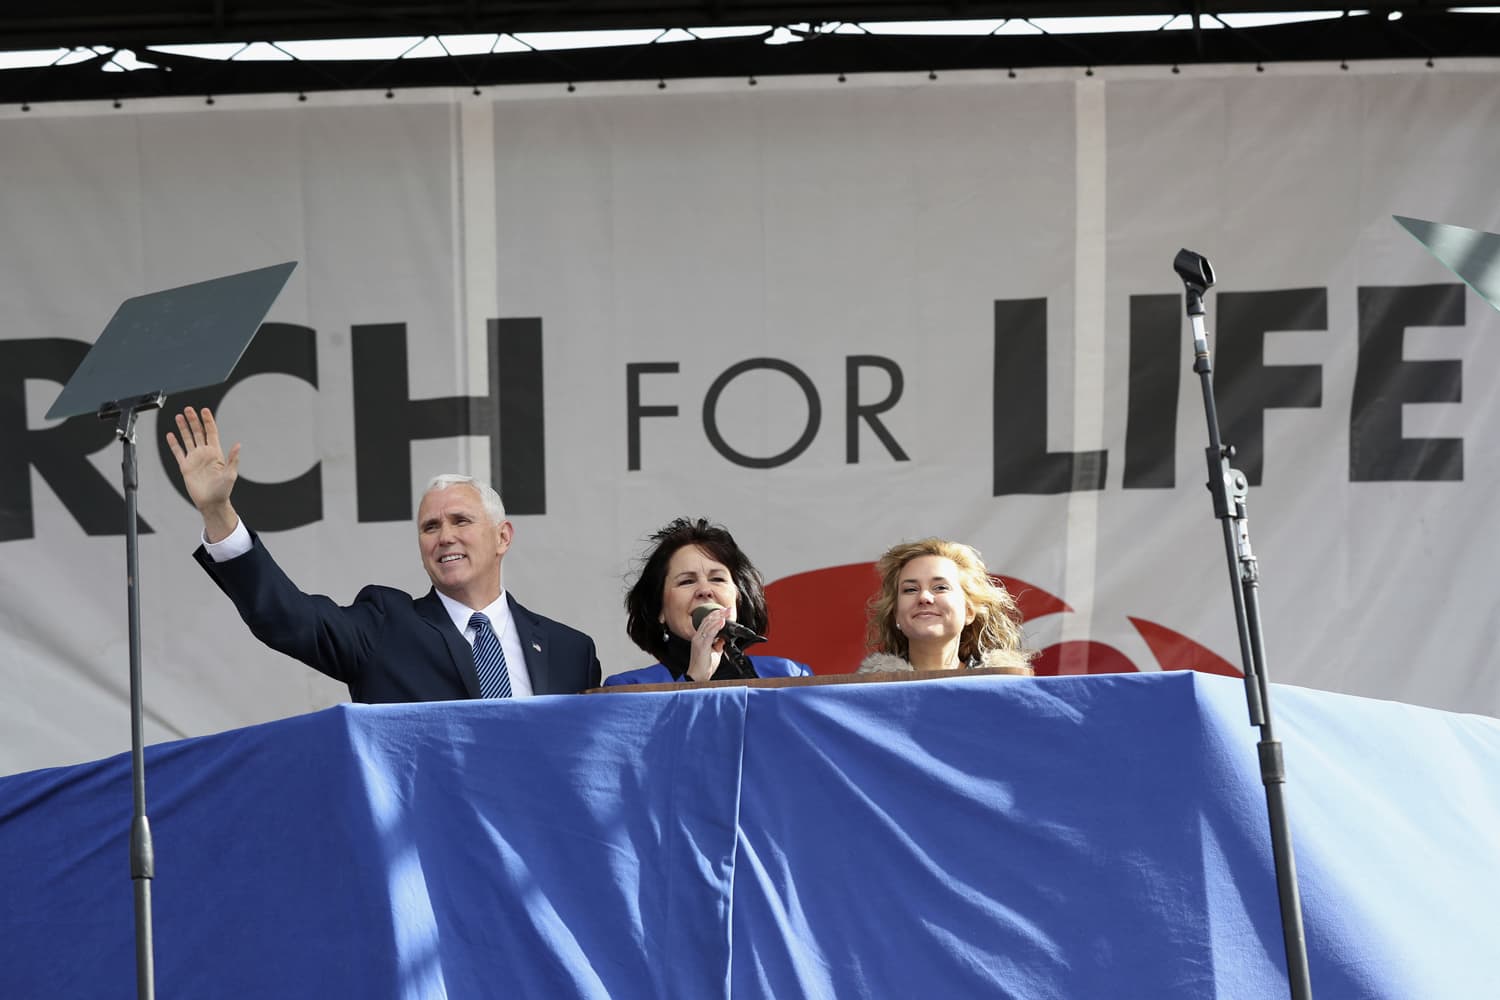 Vice President Mike Pence, with his wife Karen Pence, center, waves while speaking at the March for Life on the National Mall in Washington. (Manuel Balce Ceneta/AP)